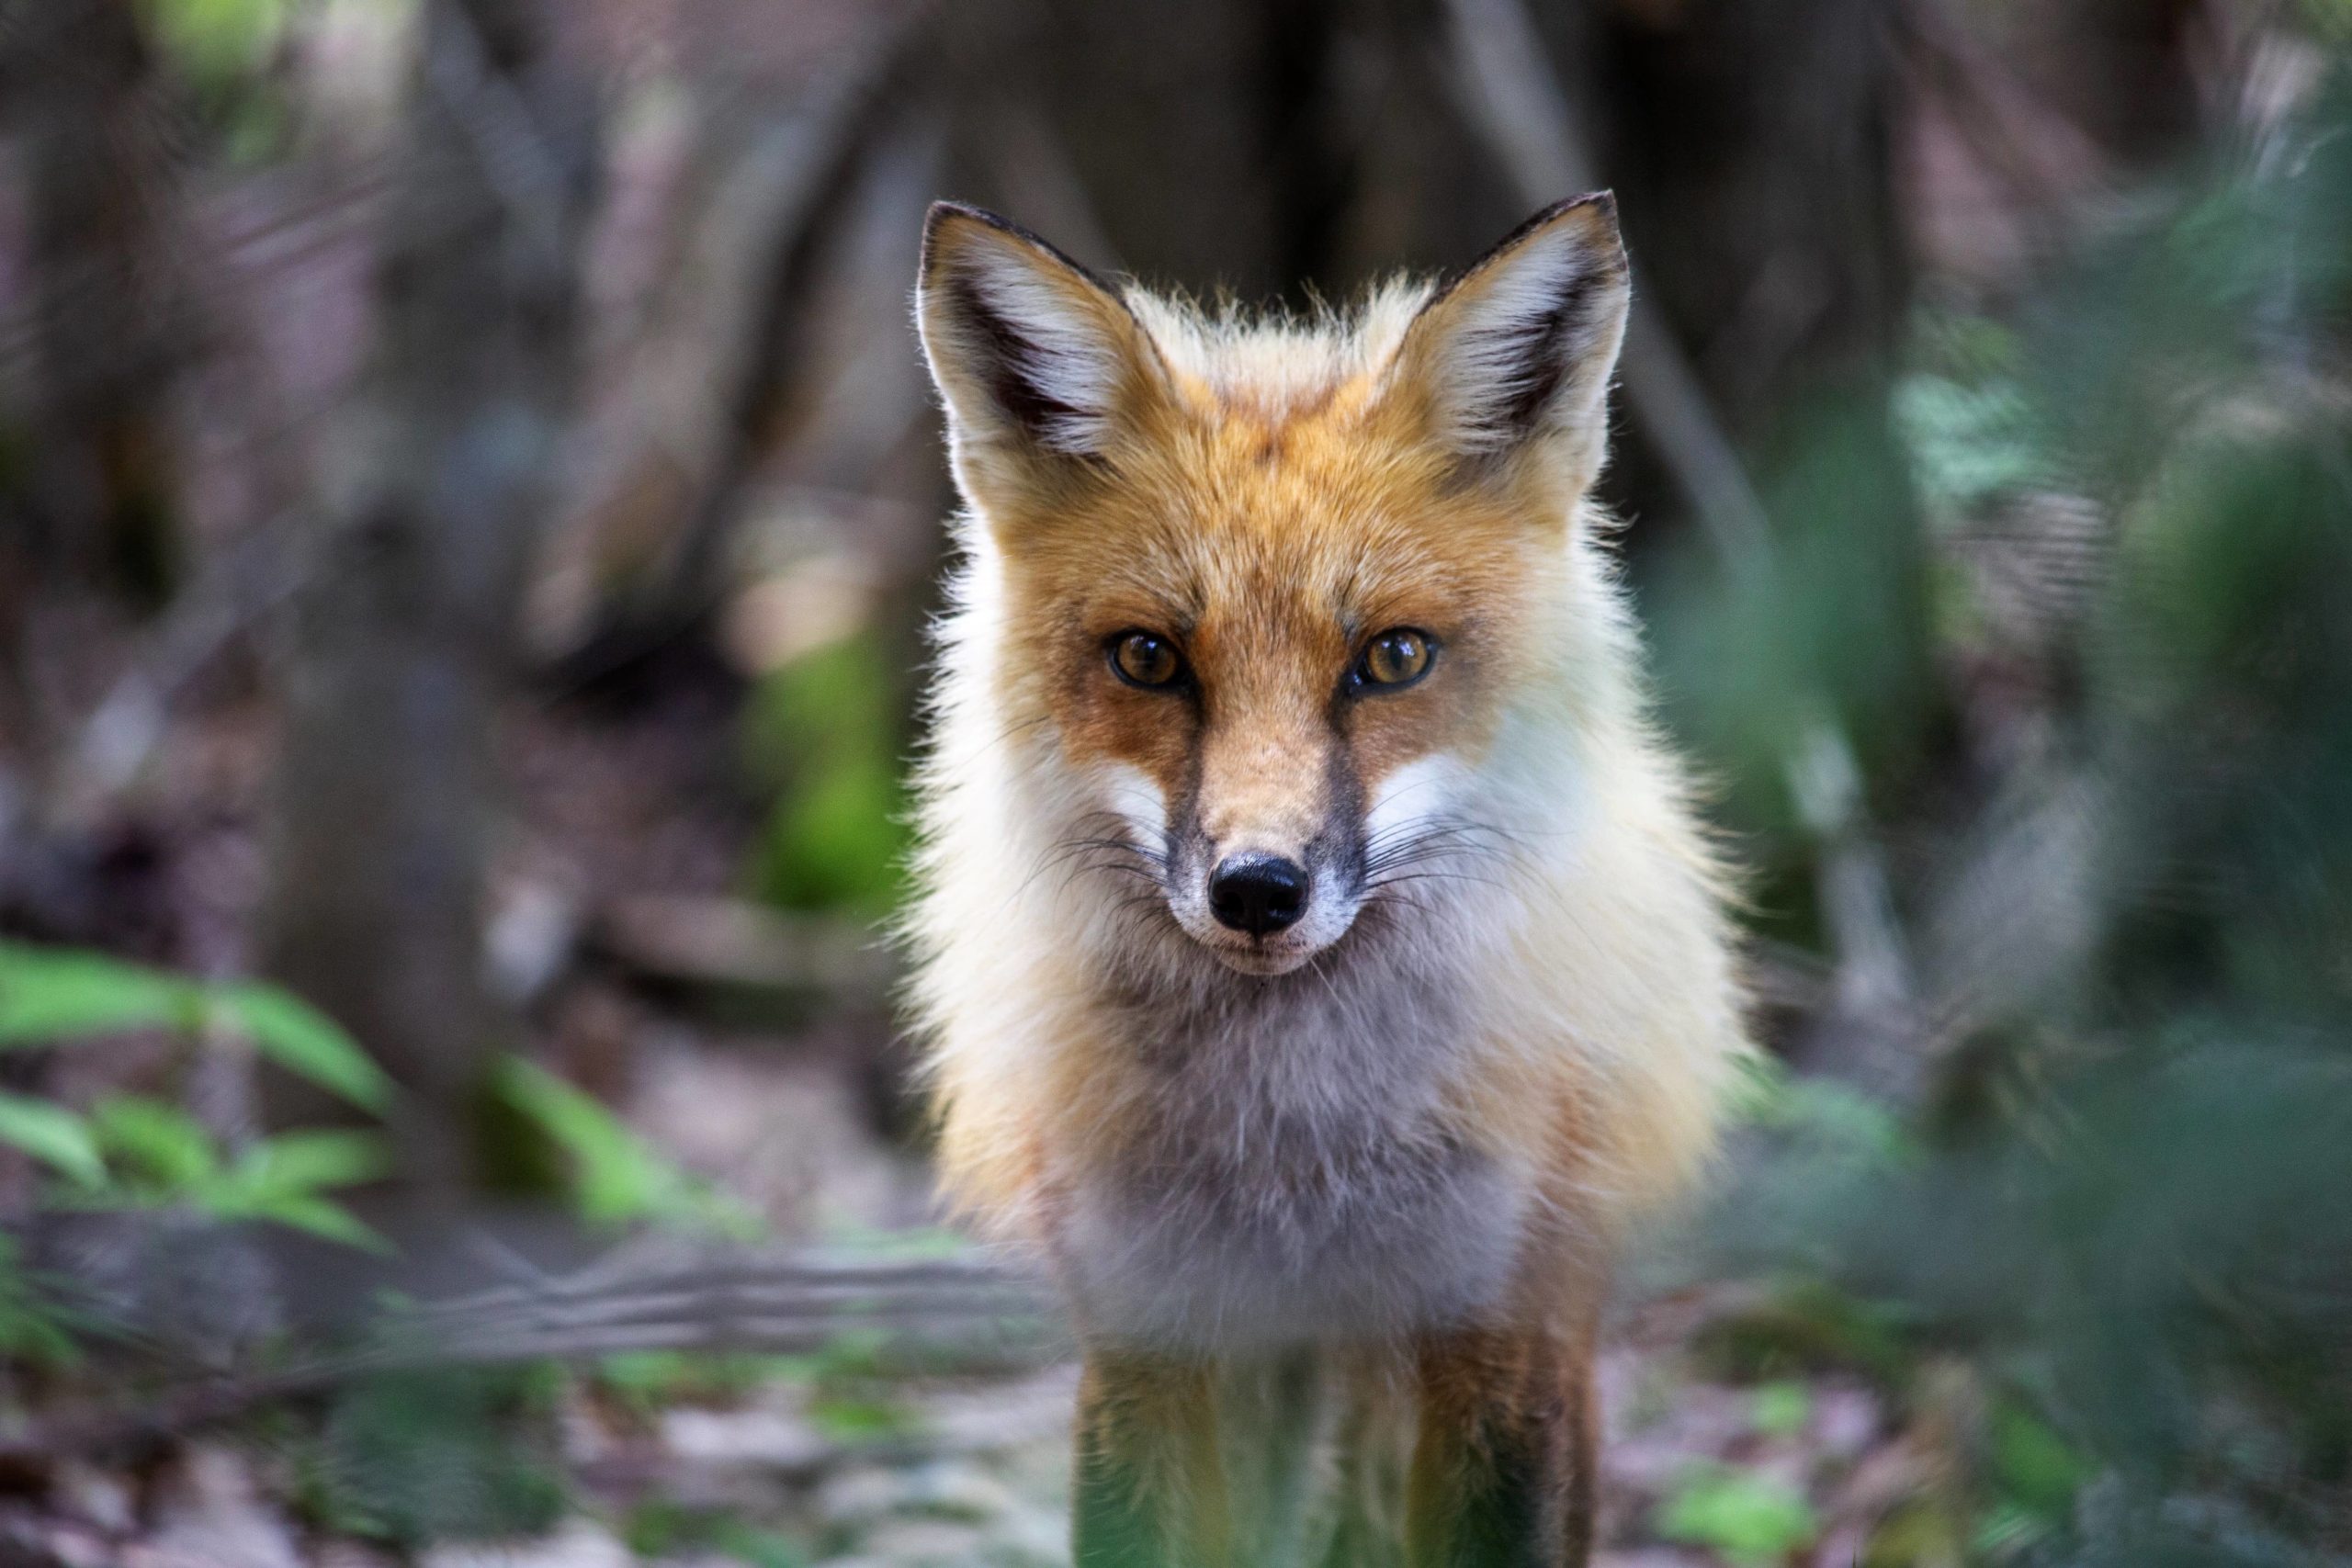 Meet the resourceful red fox - Nature Canada